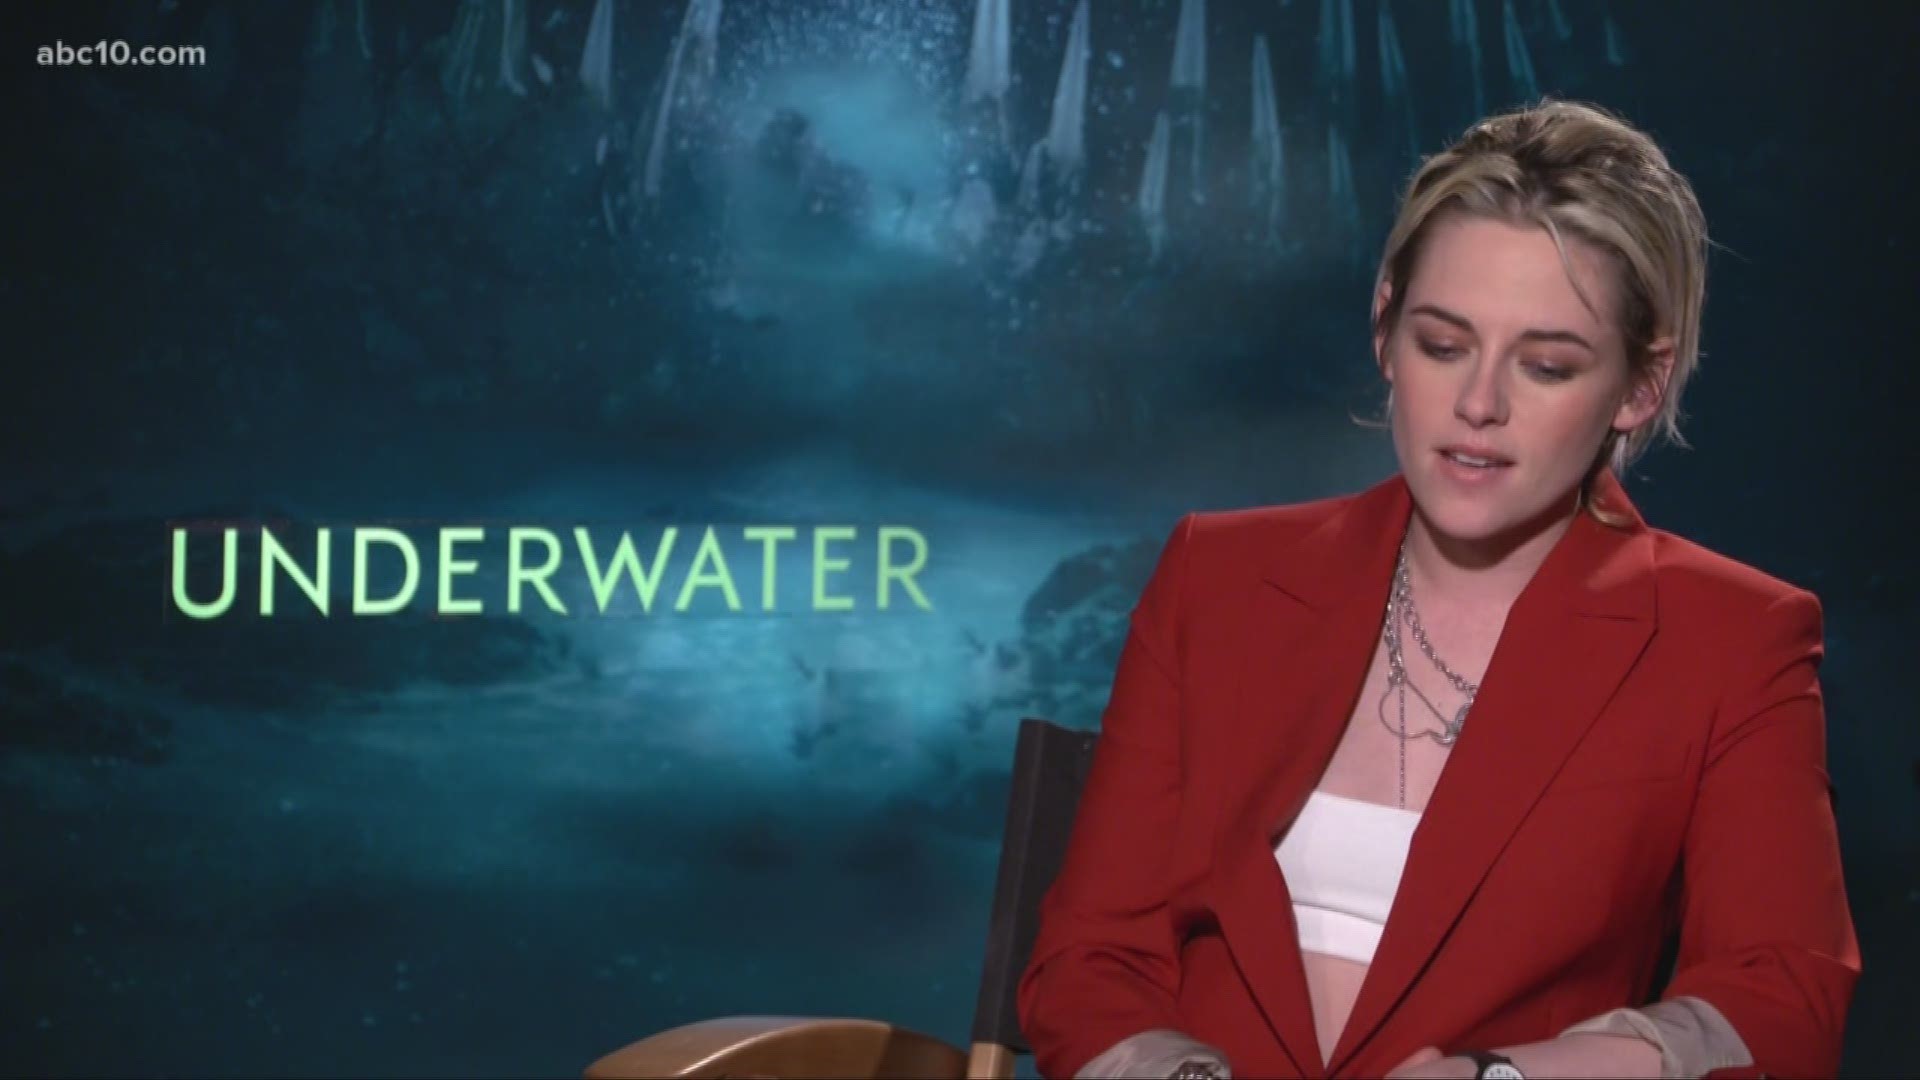 Mark S. Allen gets Kristen Stewart to talk about filming Underwater, a new horror film that takes place...you guessed it, underwater.